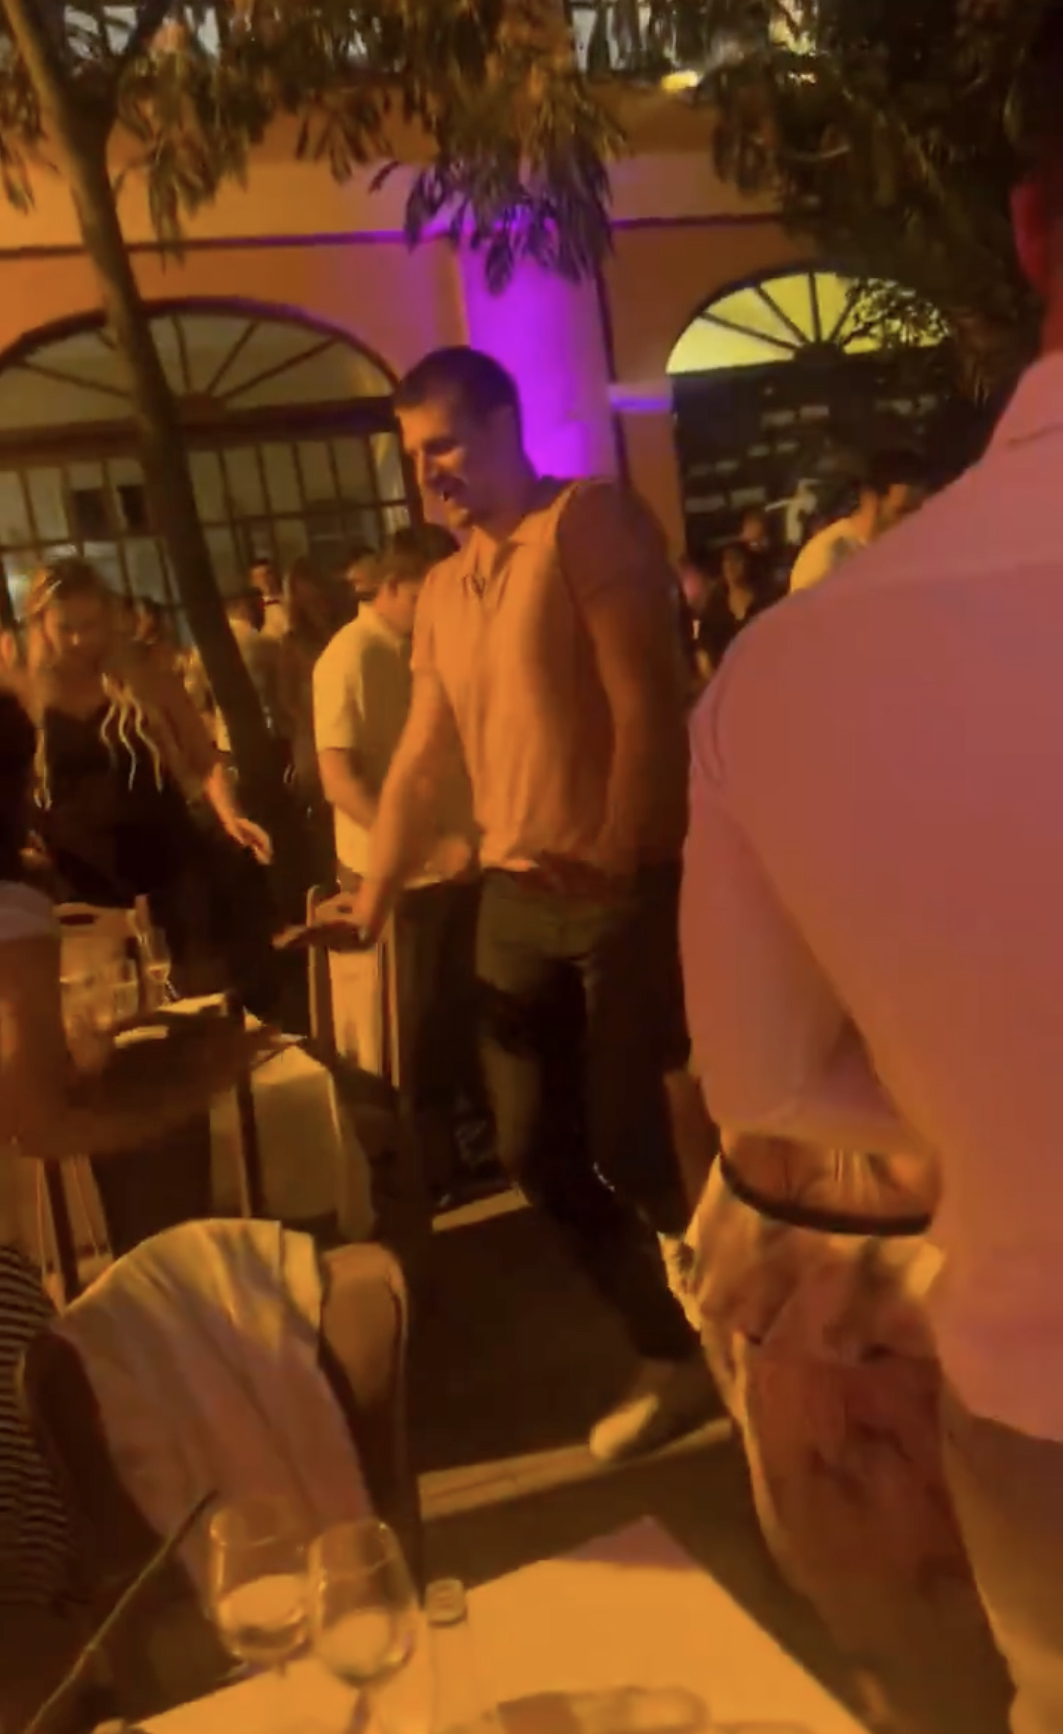 Denver Nuggets star Nikola Jokic was spotted dancing at a party during the NBA offseason